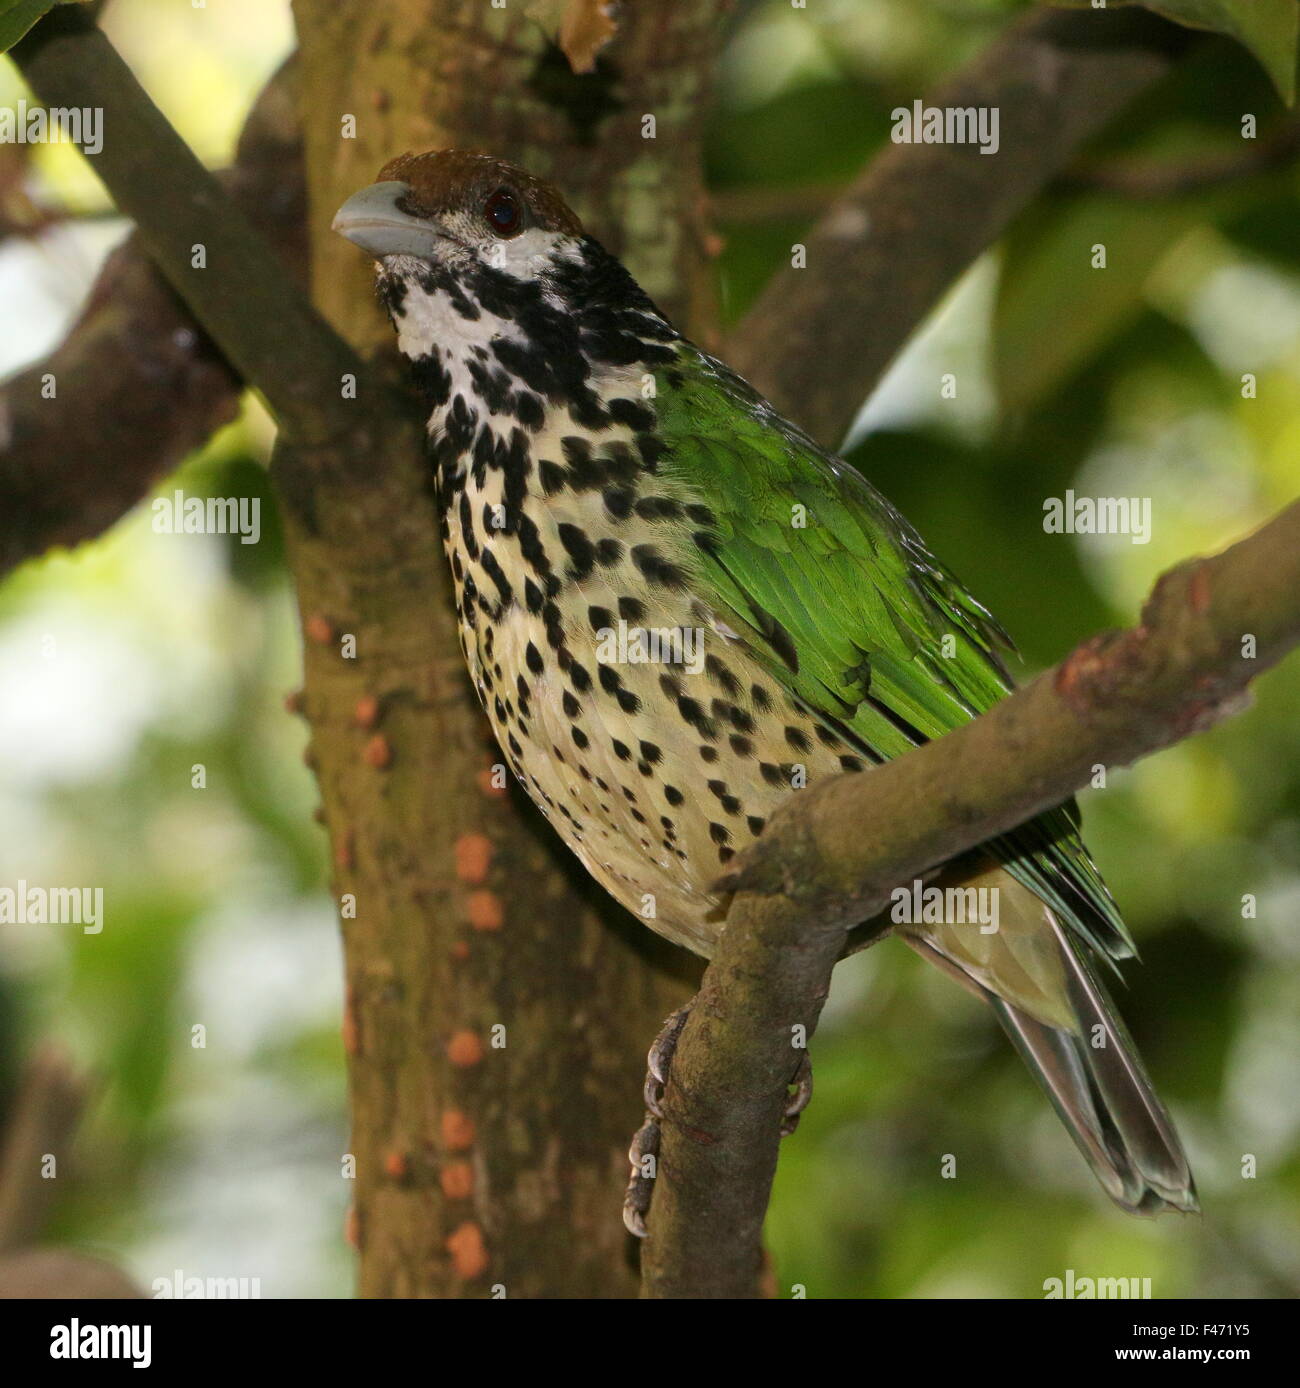 White eared catbird (Ailuroedus buccoides), native to Papua New Guinea, West Papua and some smaller Indonesian islands Stock Photo